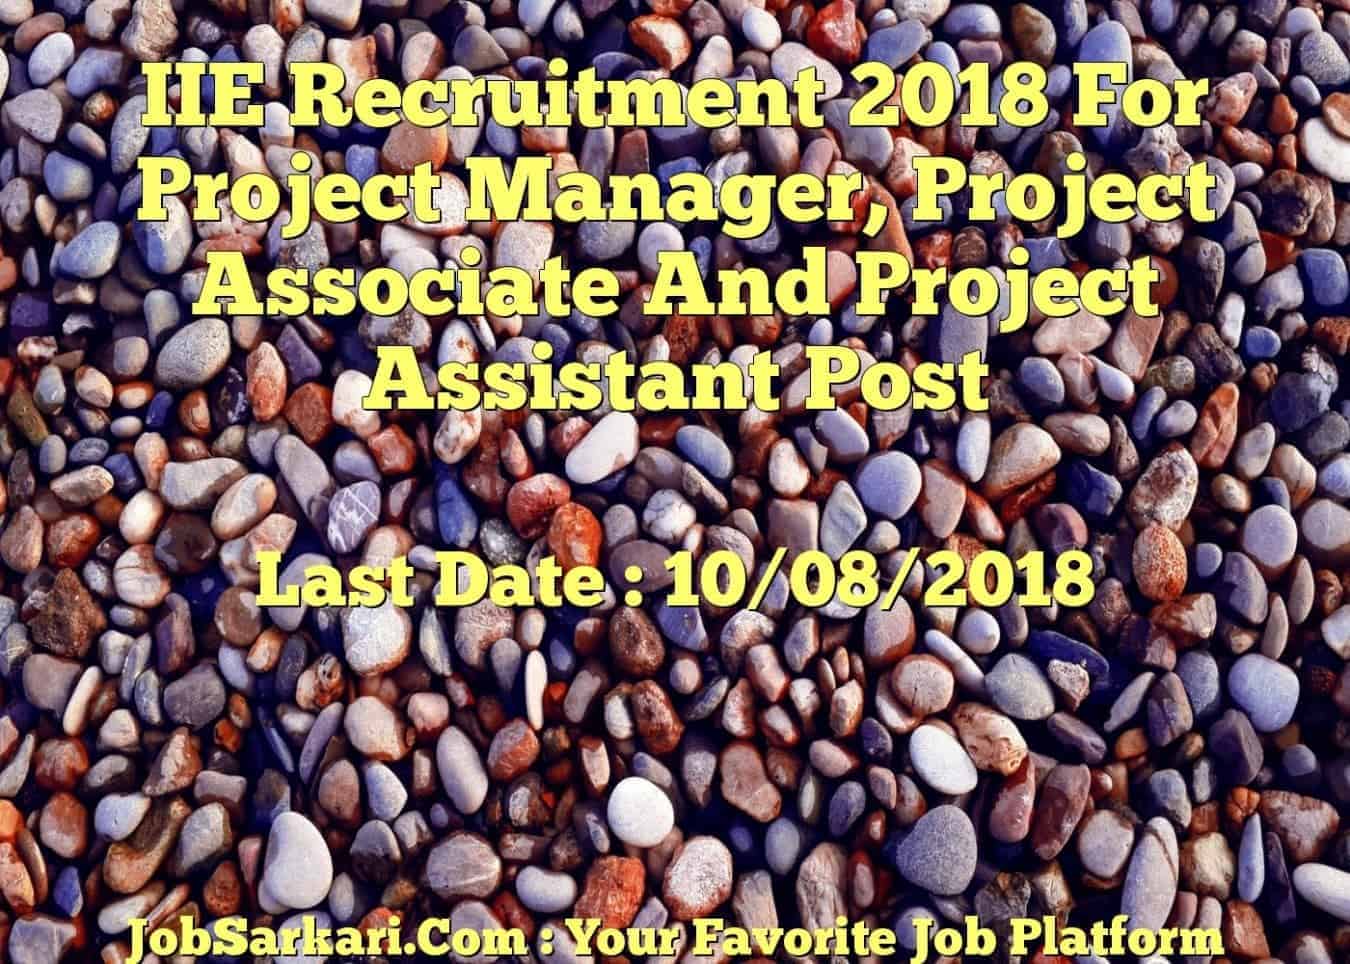 IIE Recruitment 2018 For Project Manager, Project Associate And Project Assistant Post